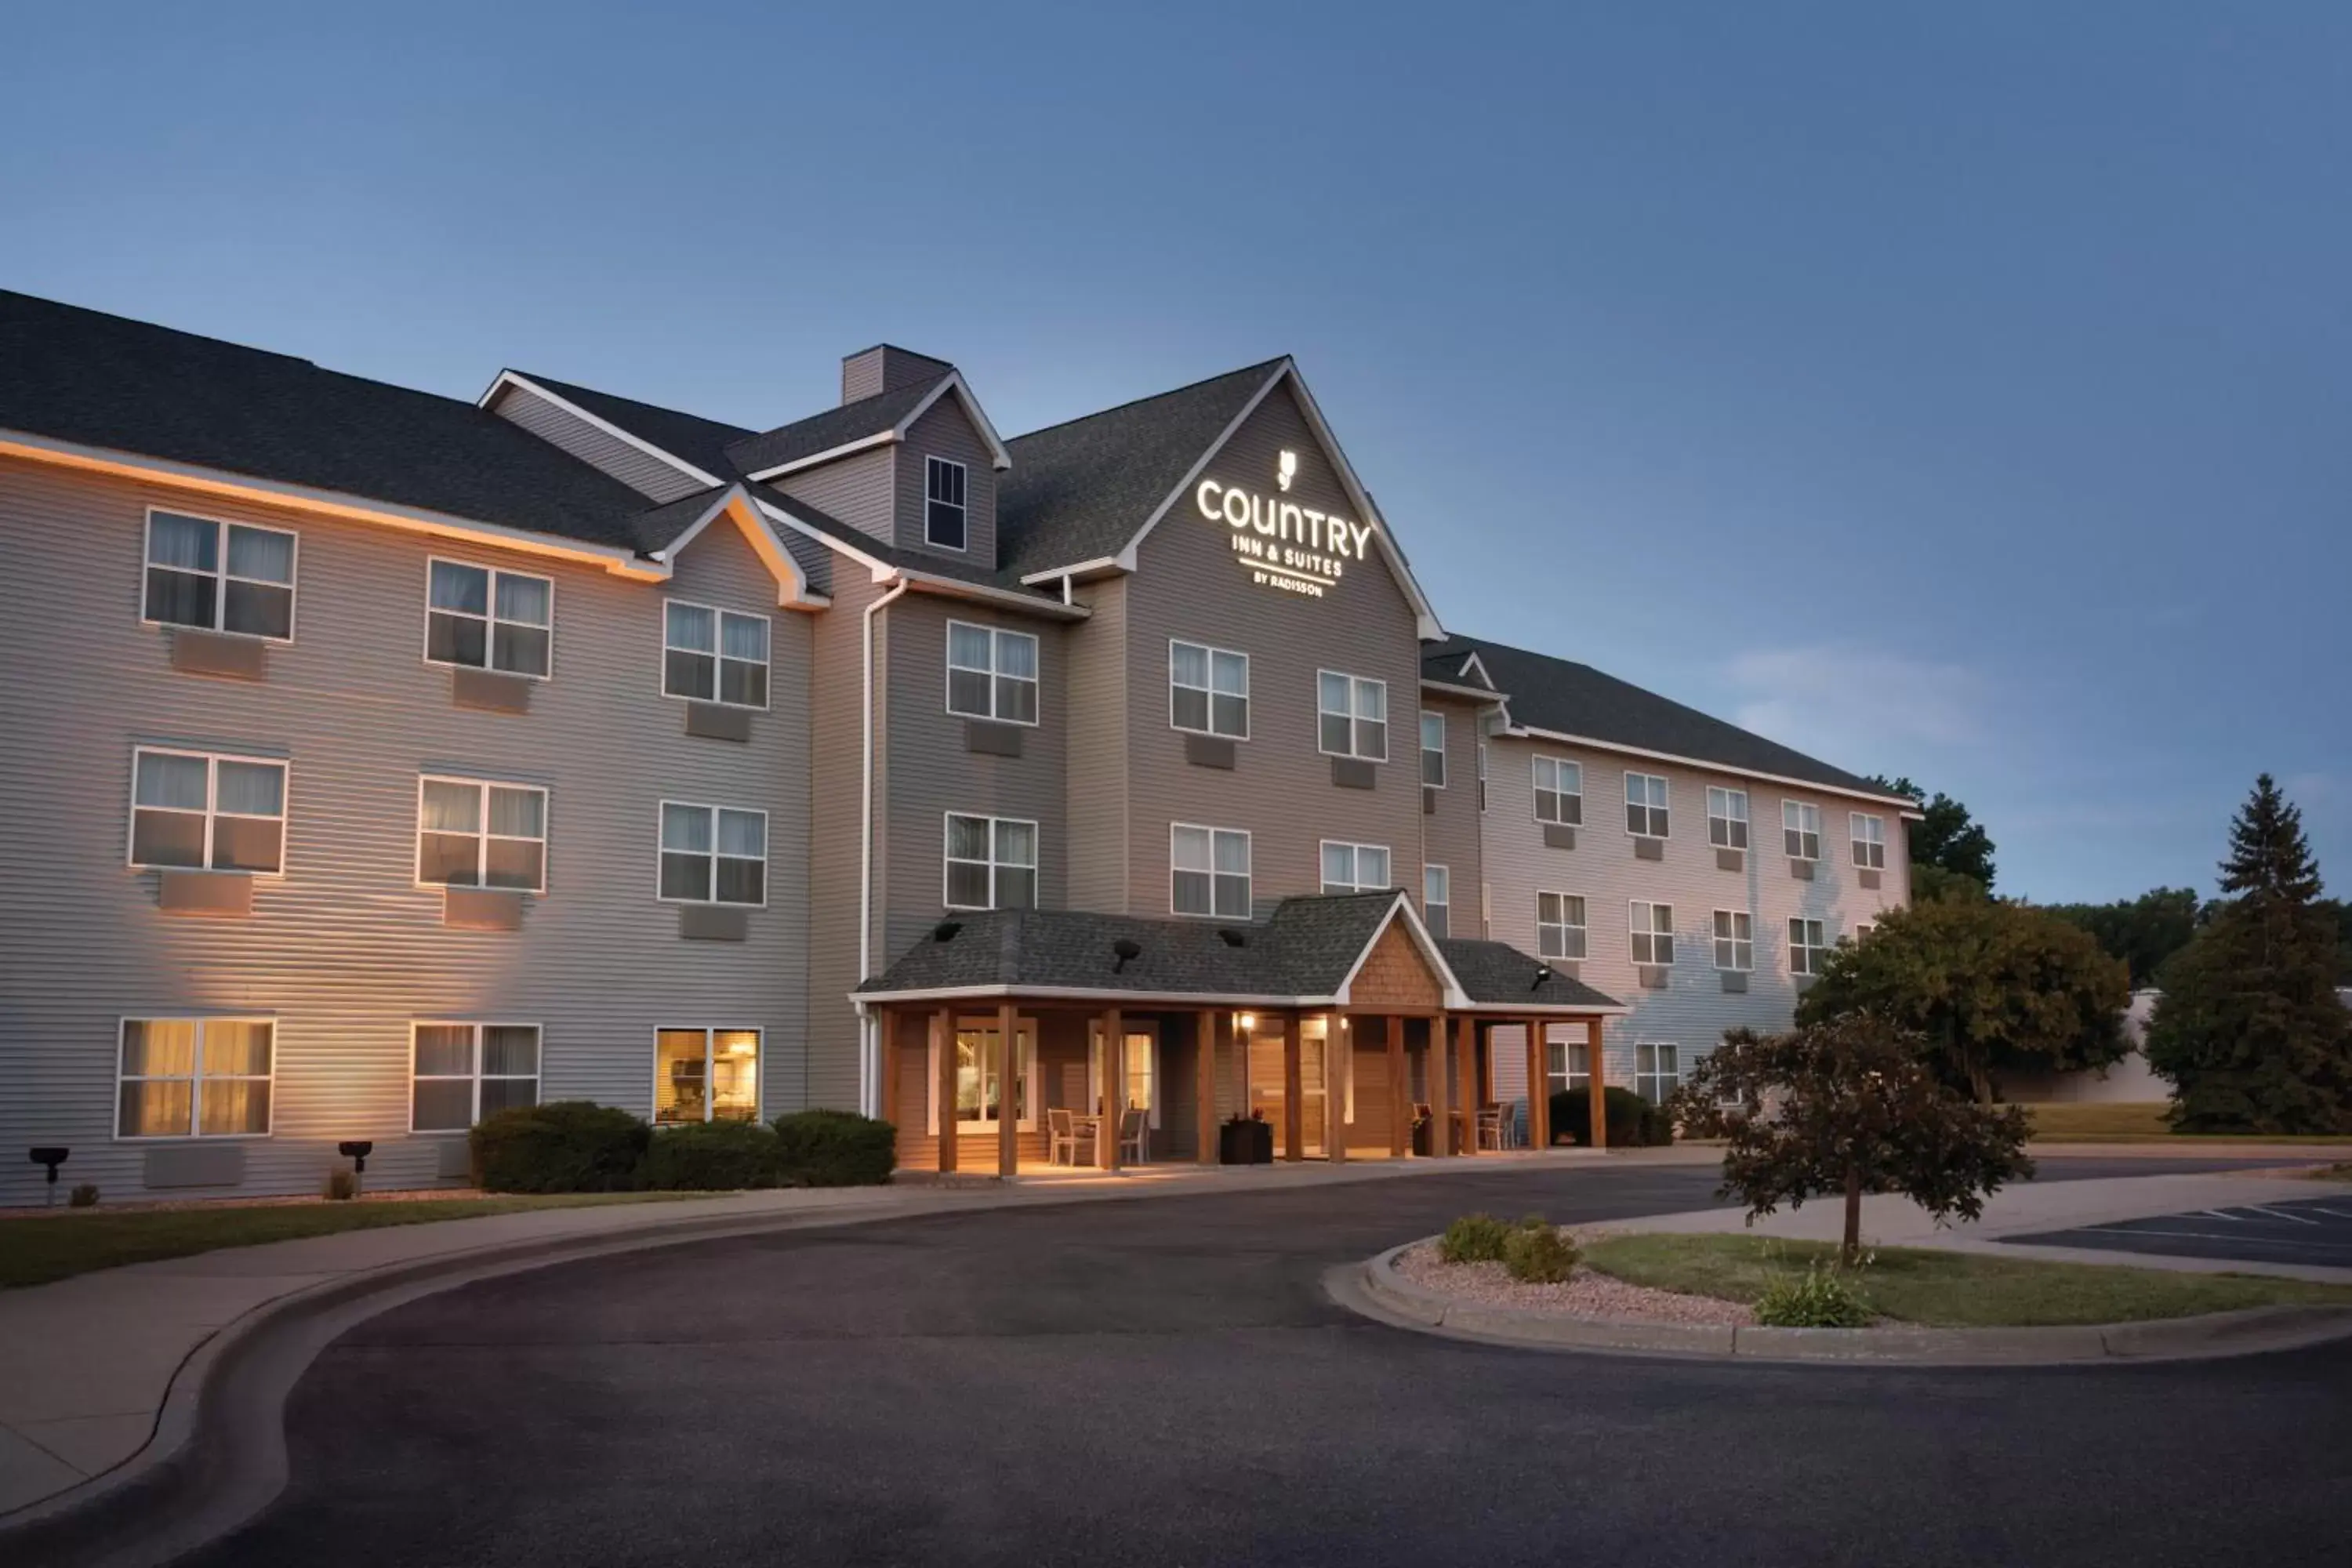 Facade/entrance, Property Building in Country Inn & Suites by Radisson, Brooklyn Center, MN